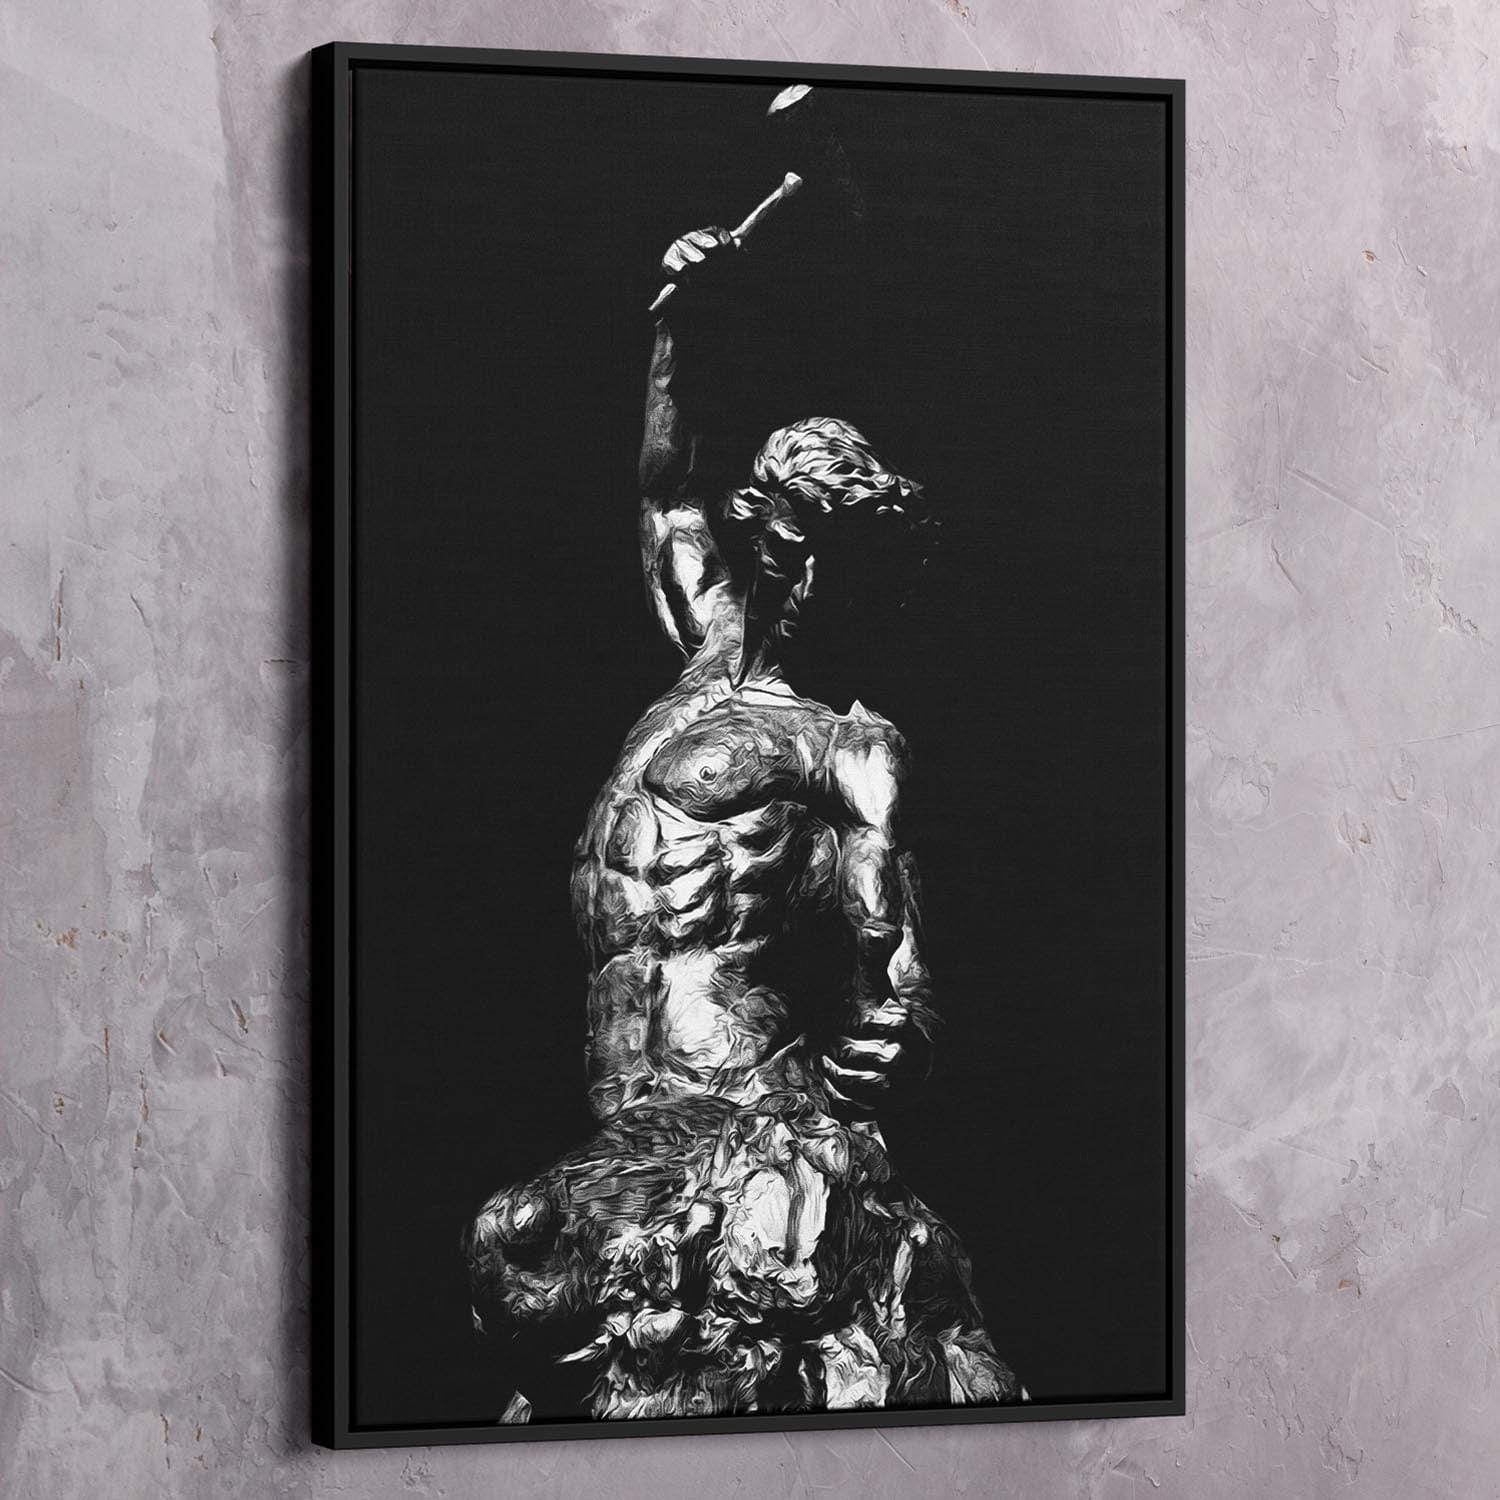 Self Made Man Statue Black White - Shop exclusive inspirational wall art, motivational wall art, office art, home office wall decor quotes, wall art quotes, office artwork, motivational art only at ImpaktMaker in canvas and acrylic formats.